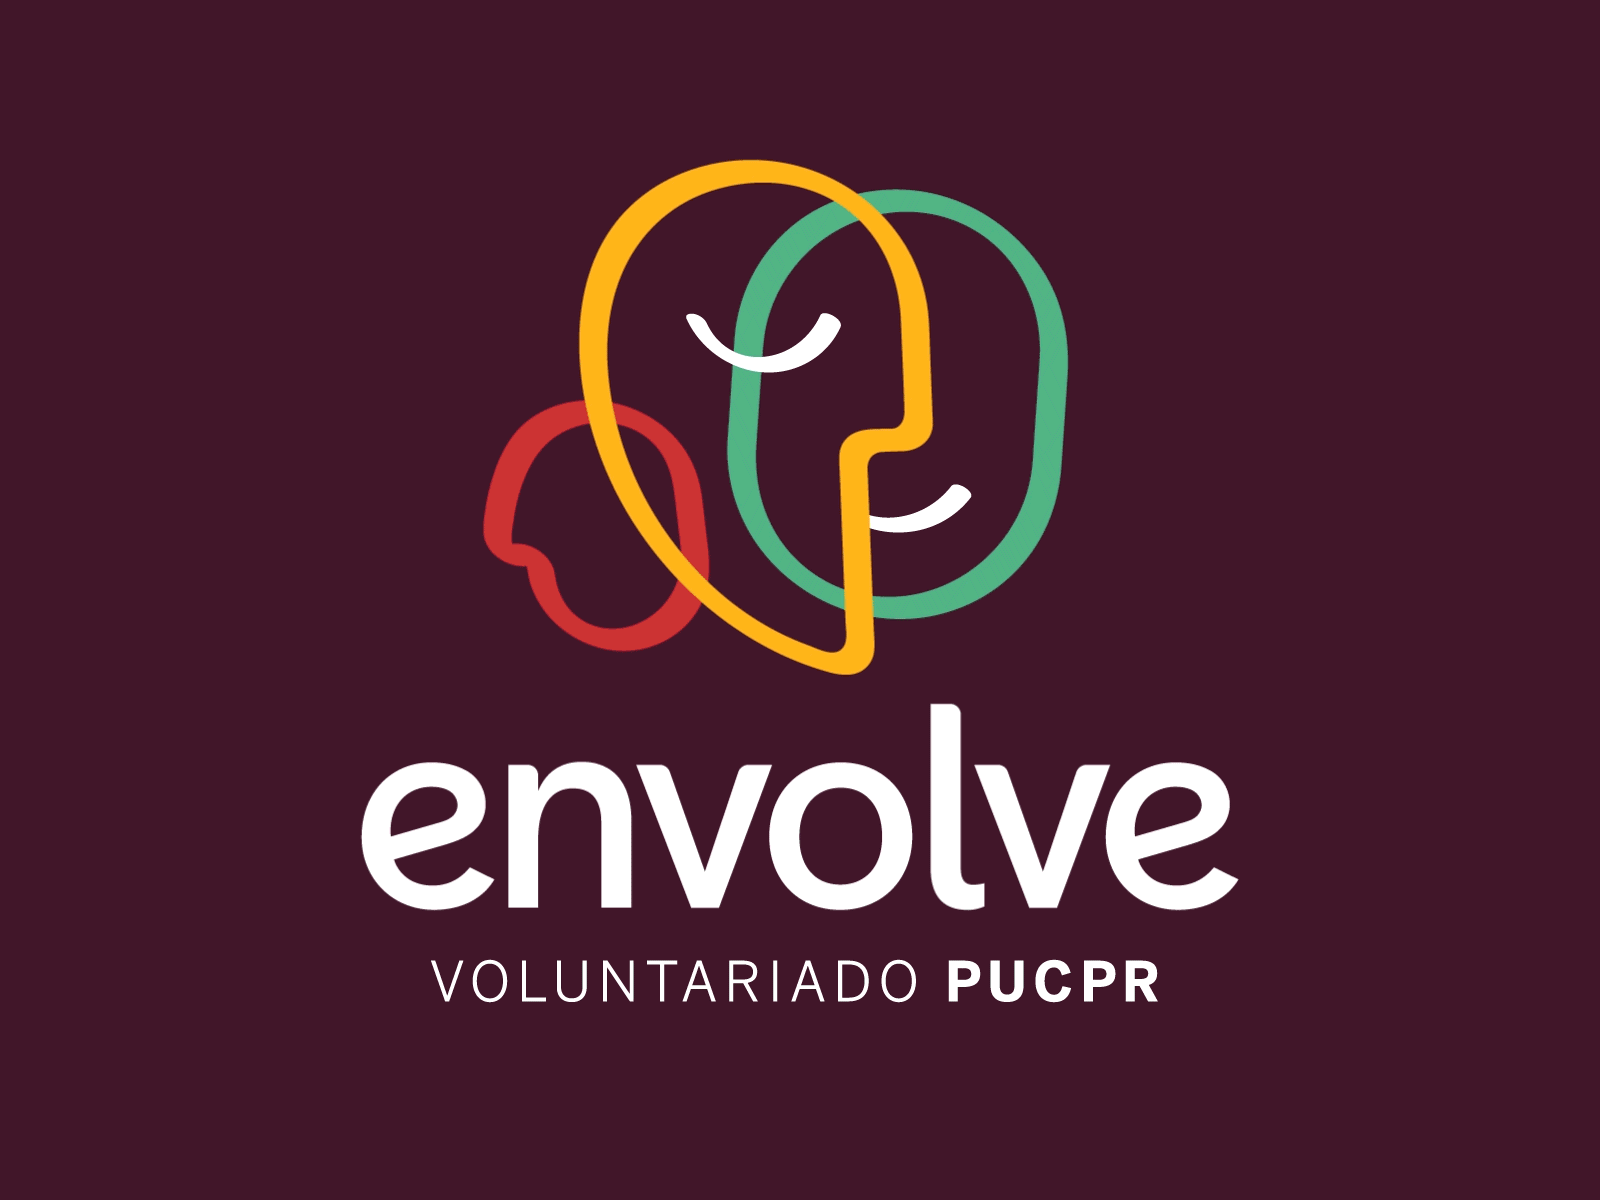 logo for PUCPR's volunteer project animated logo faces logo head logo logo logo animado logo gif puc puc pr pucpr smile logo voluntariado volunteer volunteering voluntário